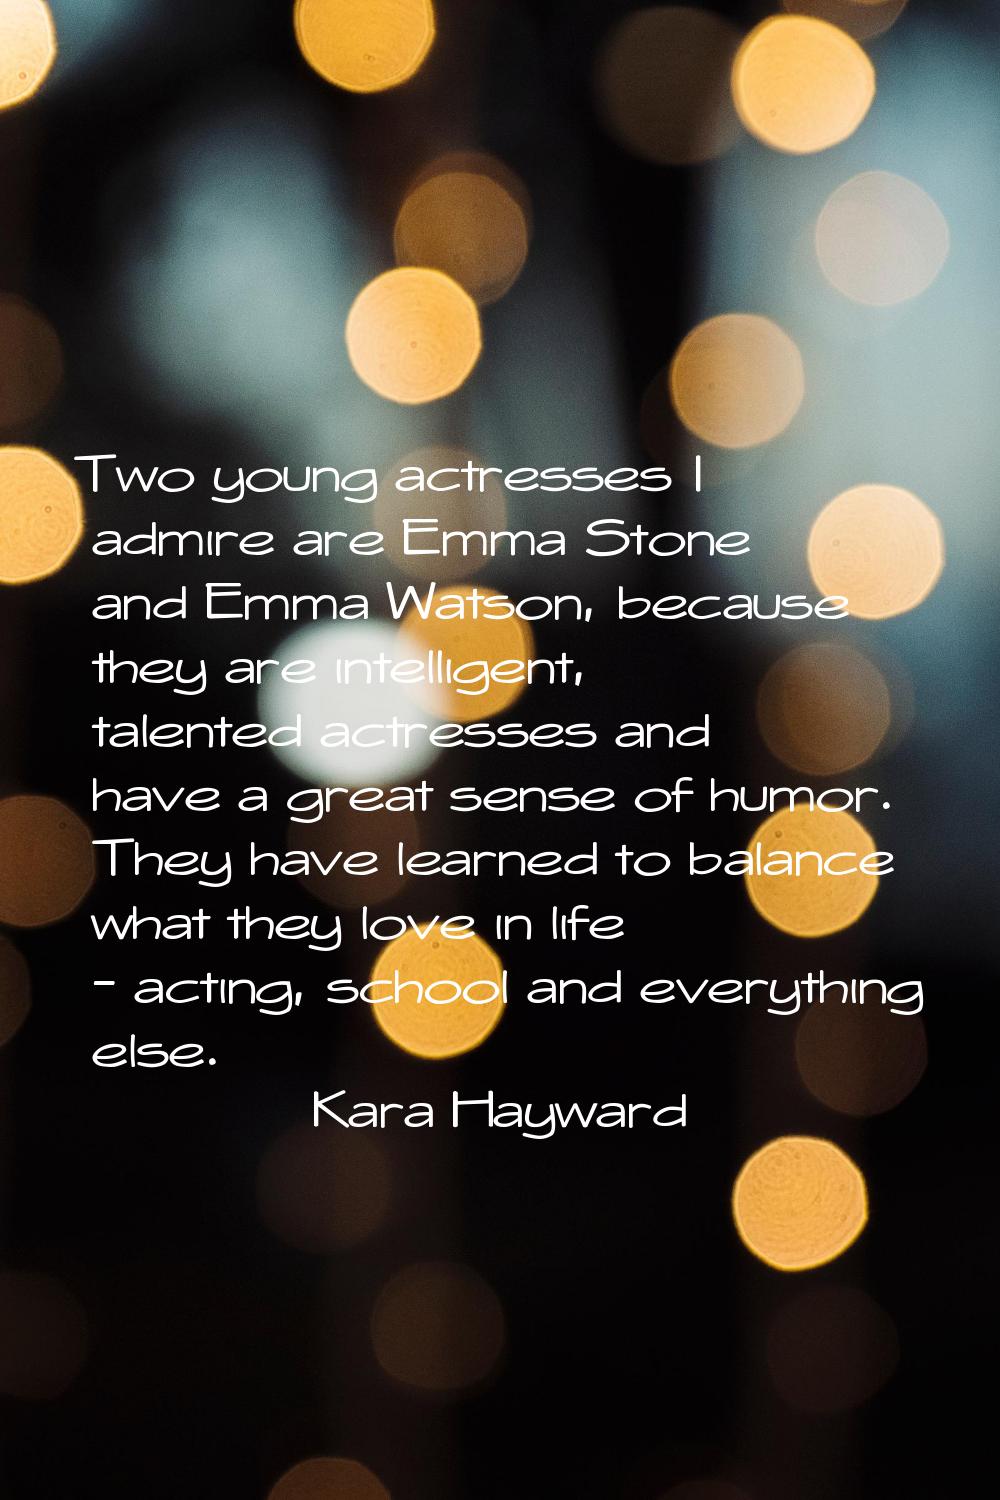 Two young actresses I admire are Emma Stone and Emma Watson, because they are intelligent, talented